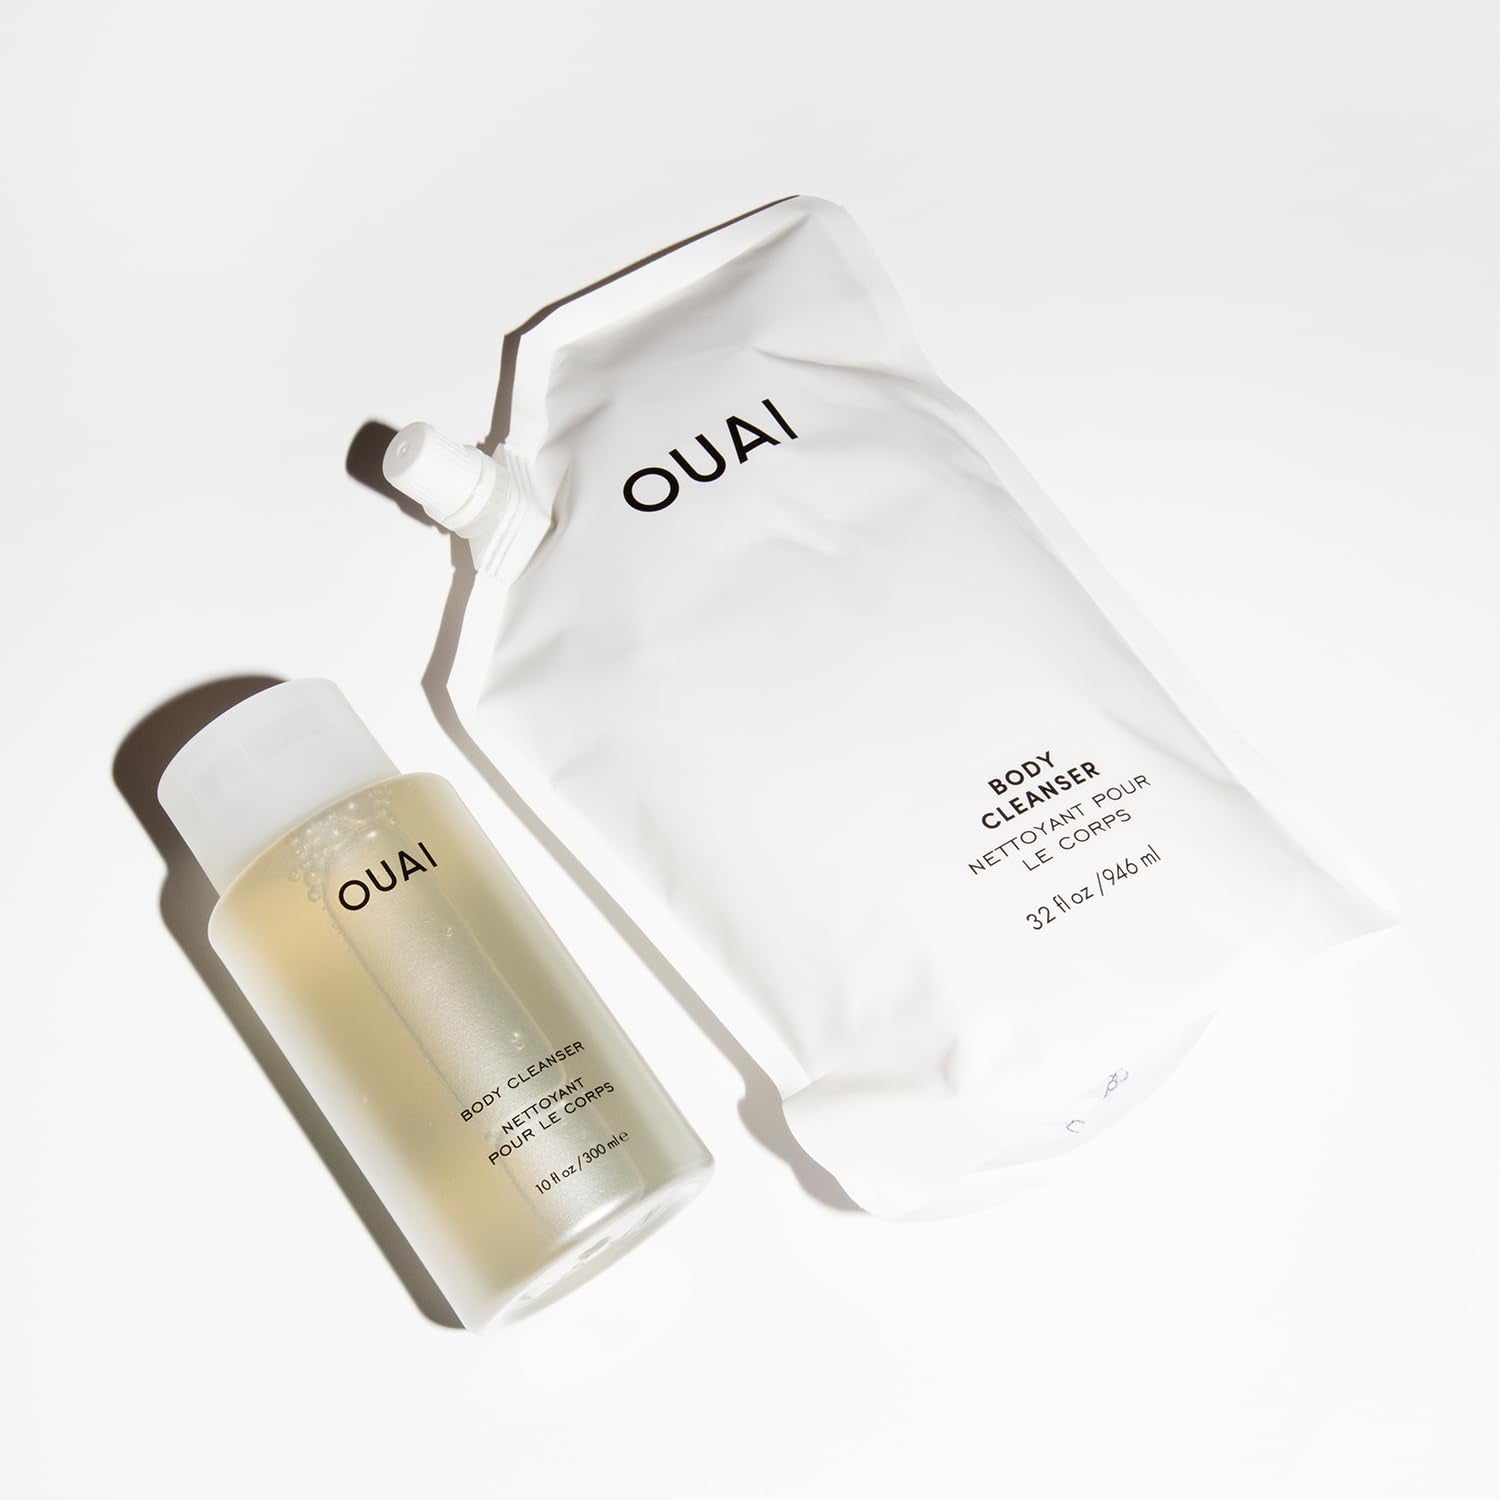 OUAI Body Cleanser Refill, Dean Street - Foaming Body Wash with Jojoba Oil and Rosehip Oil to Hydrate, Nurture, Balance and Soften Skin - Paraben, Phthalate and Sulfate Free Skin Care Products - 32 Oz : Beauty & Personal Care